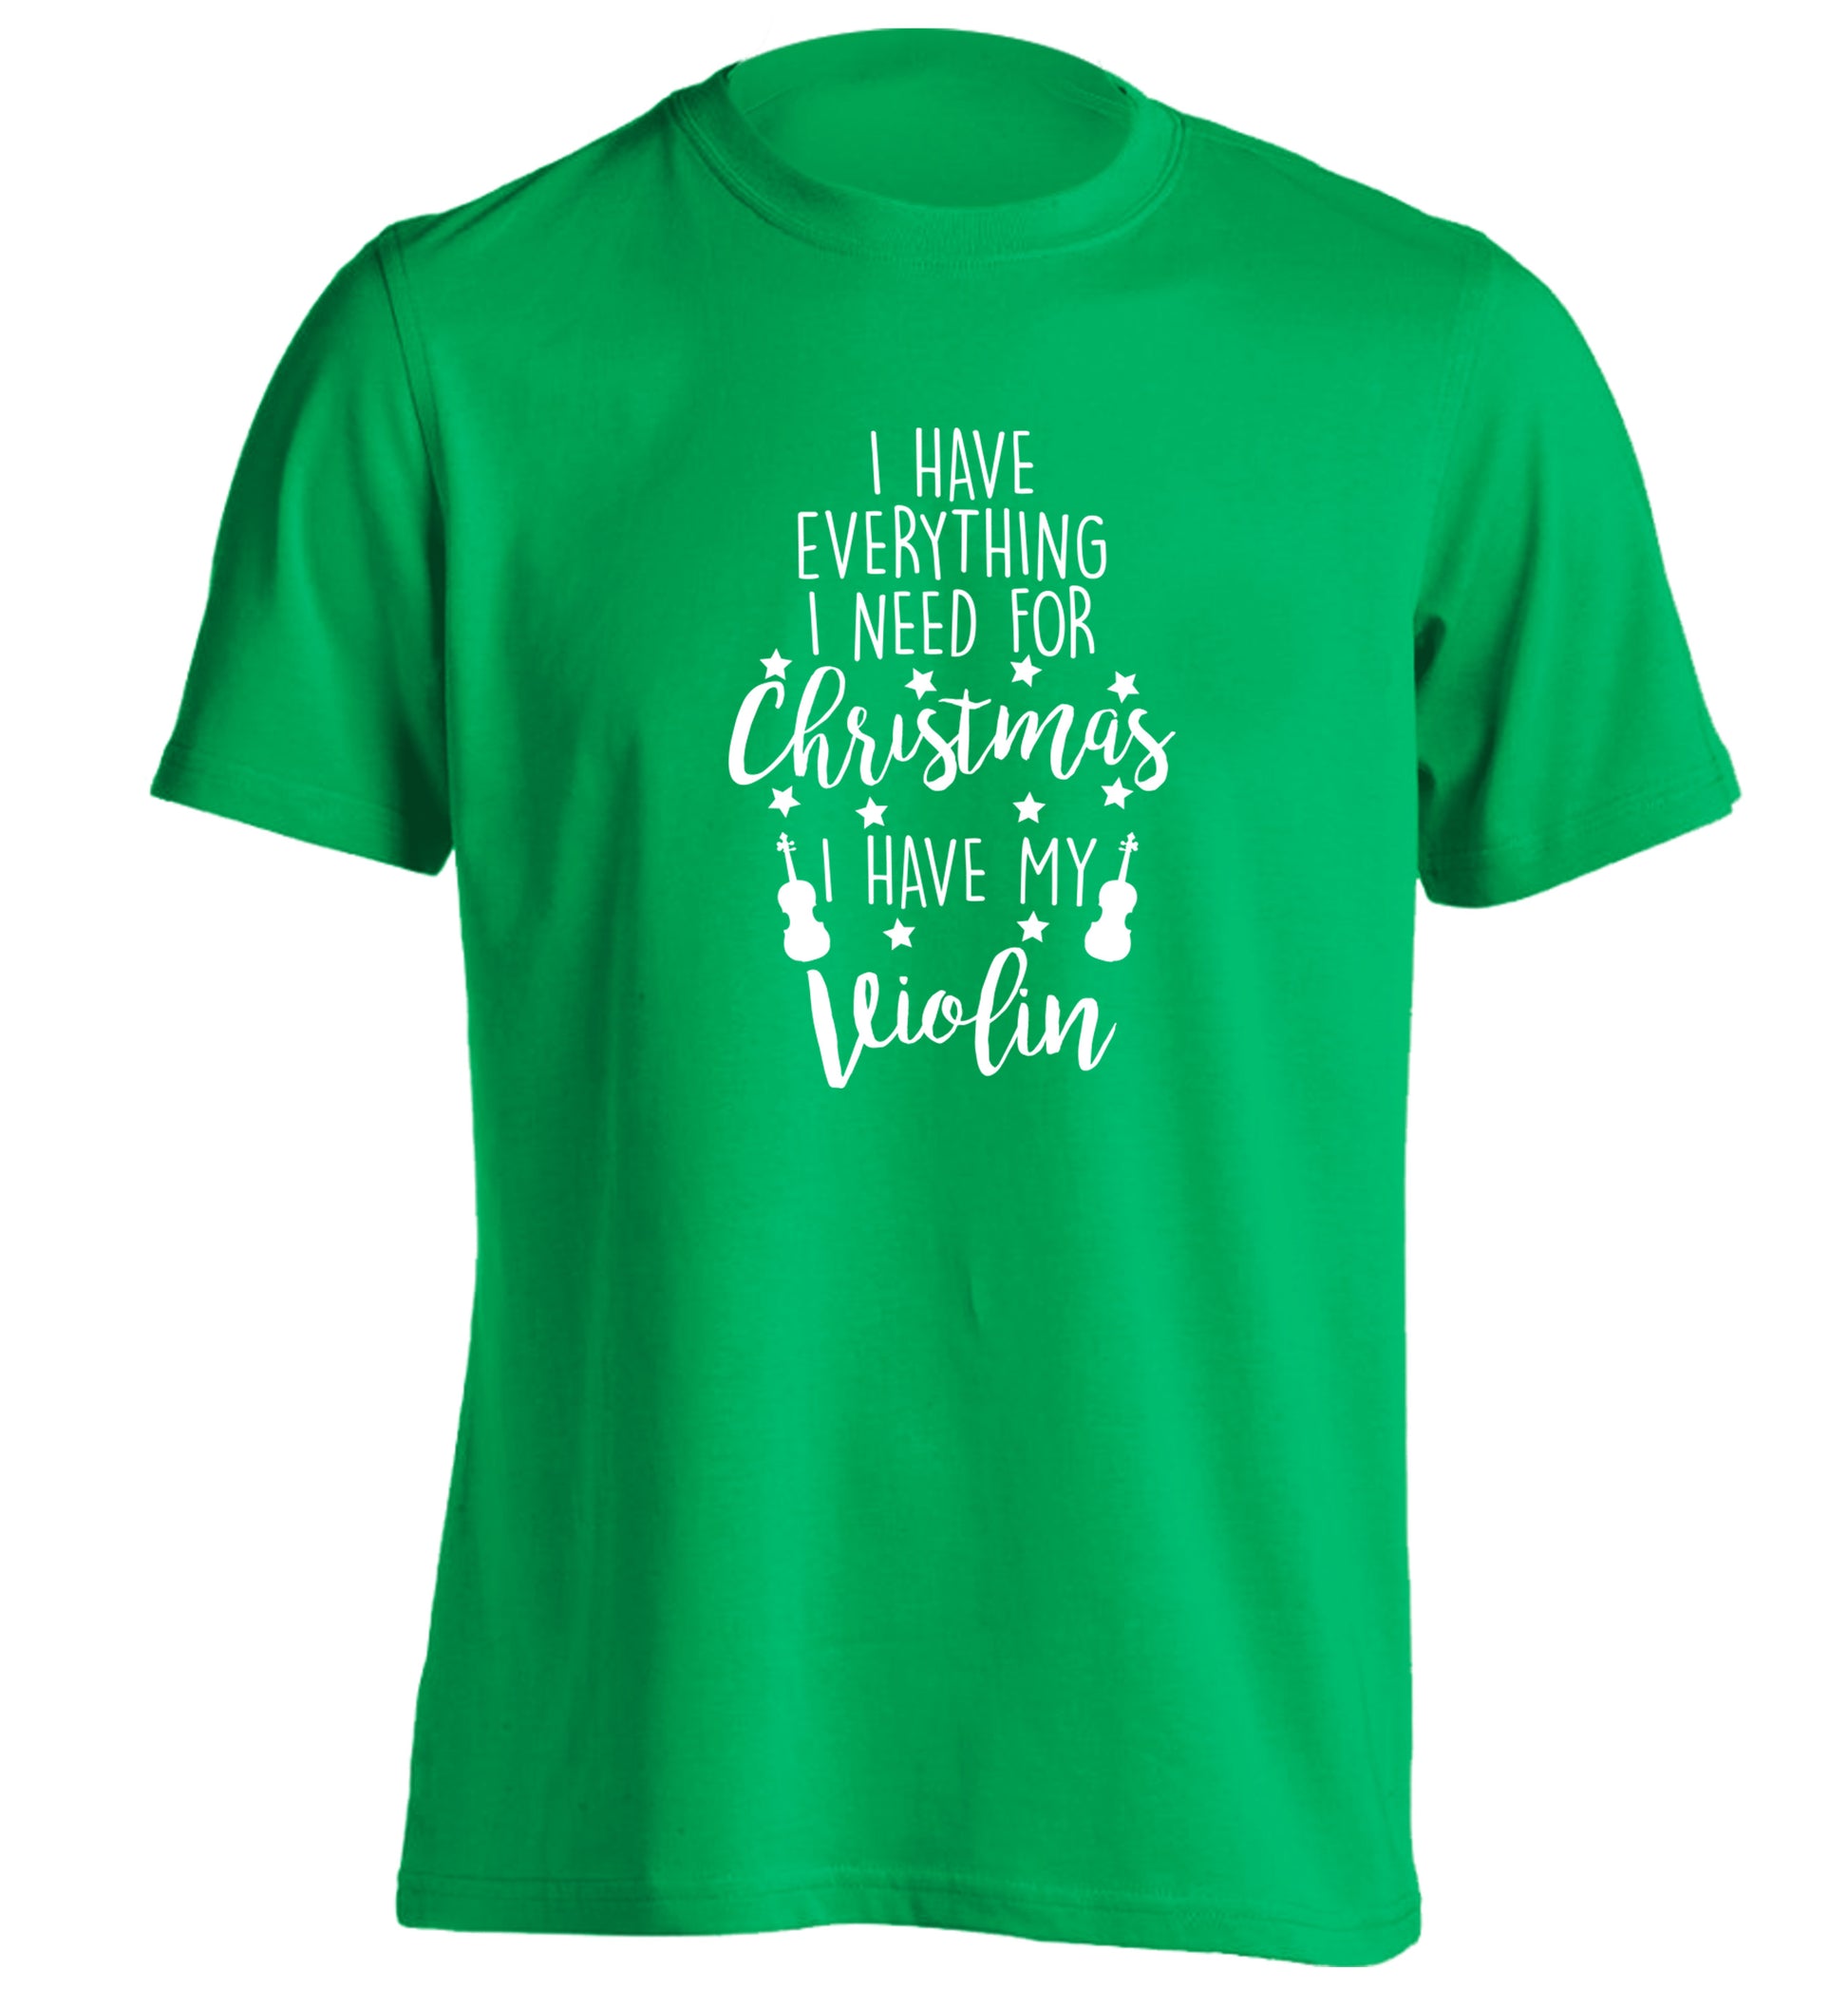 I have everything I need for Christmas I have my violin adults unisex green Tshirt 2XL